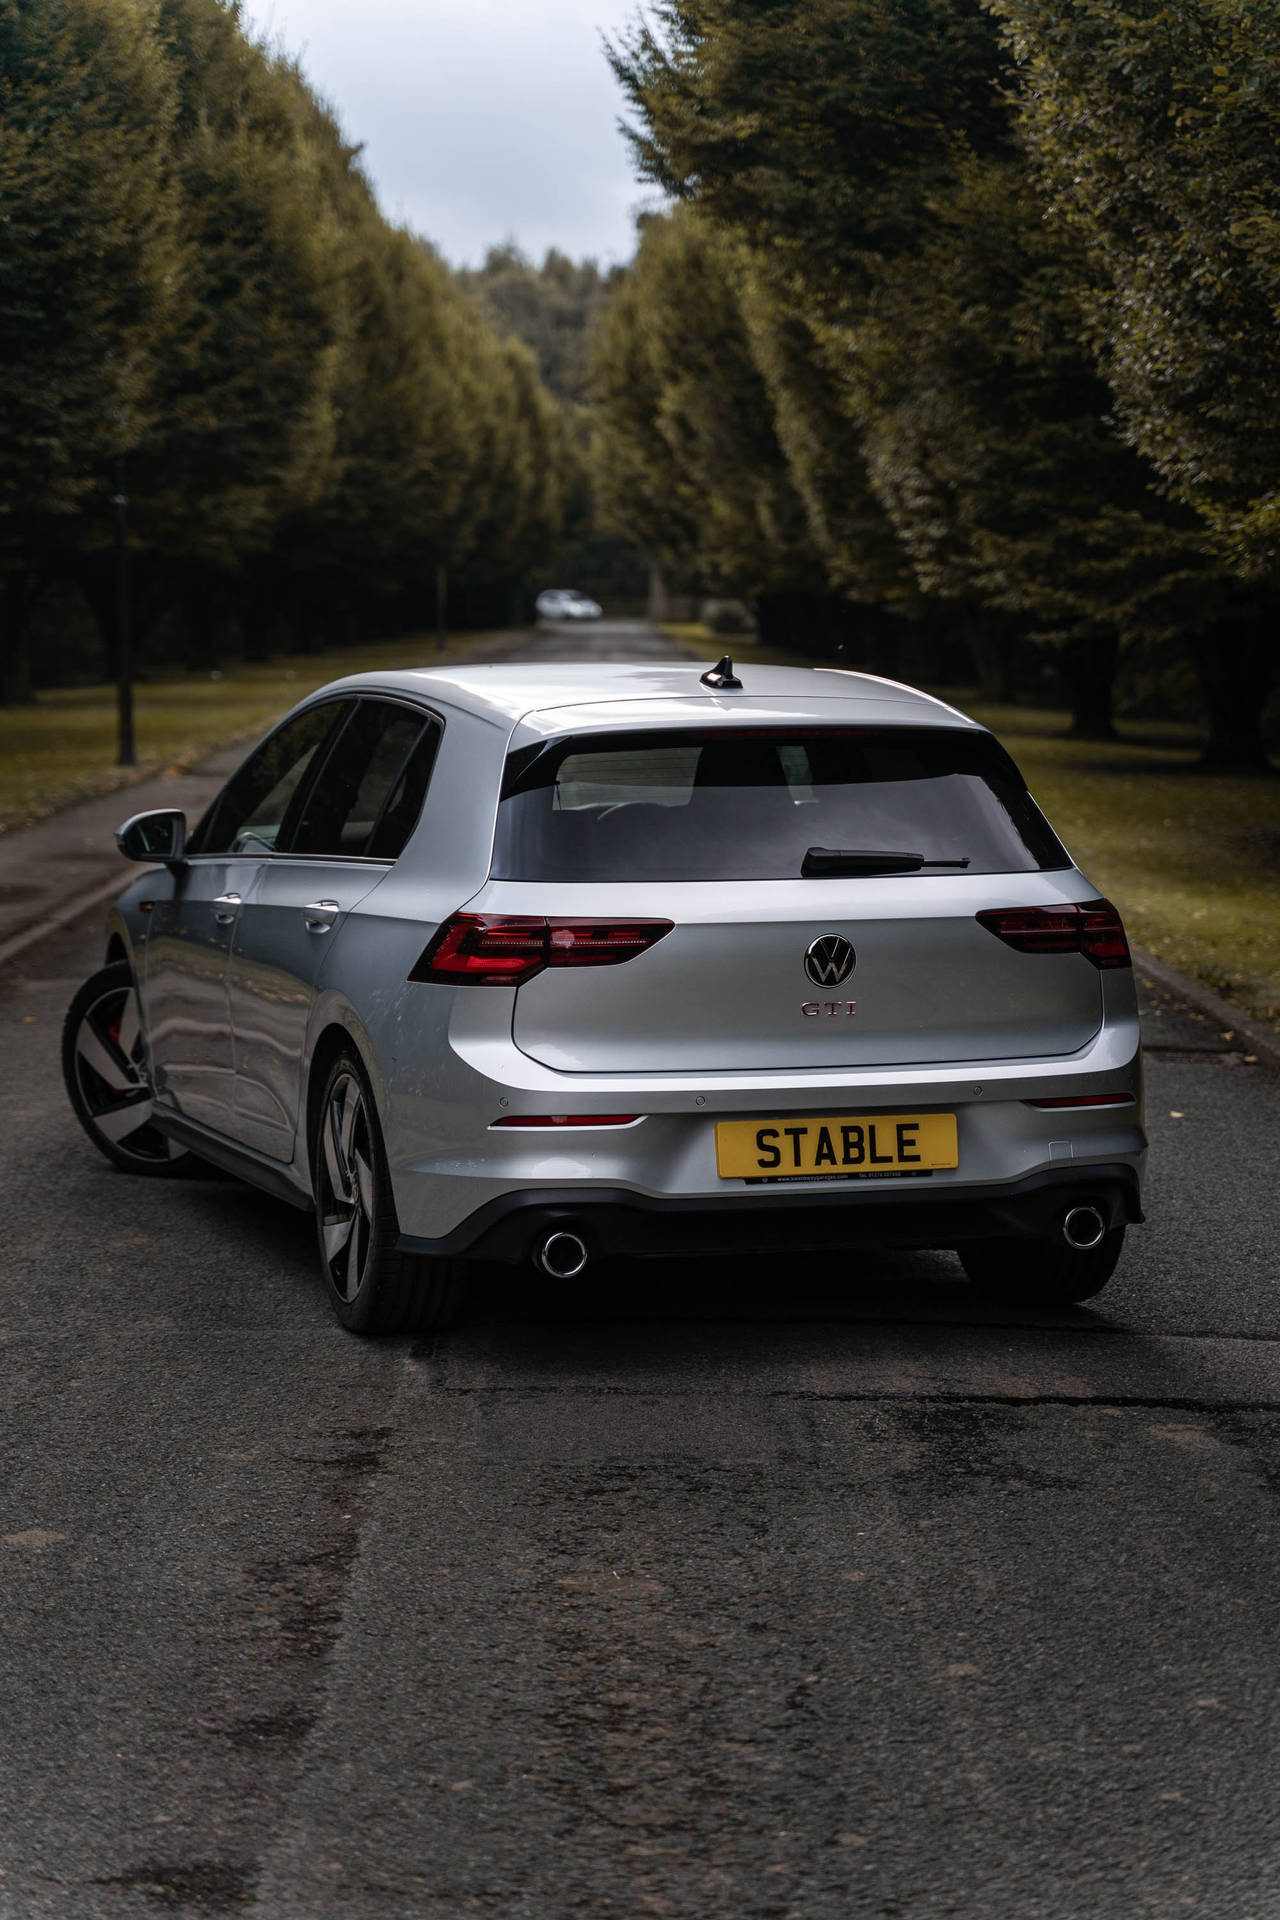 2021 Silver Golf Gti Back View Background